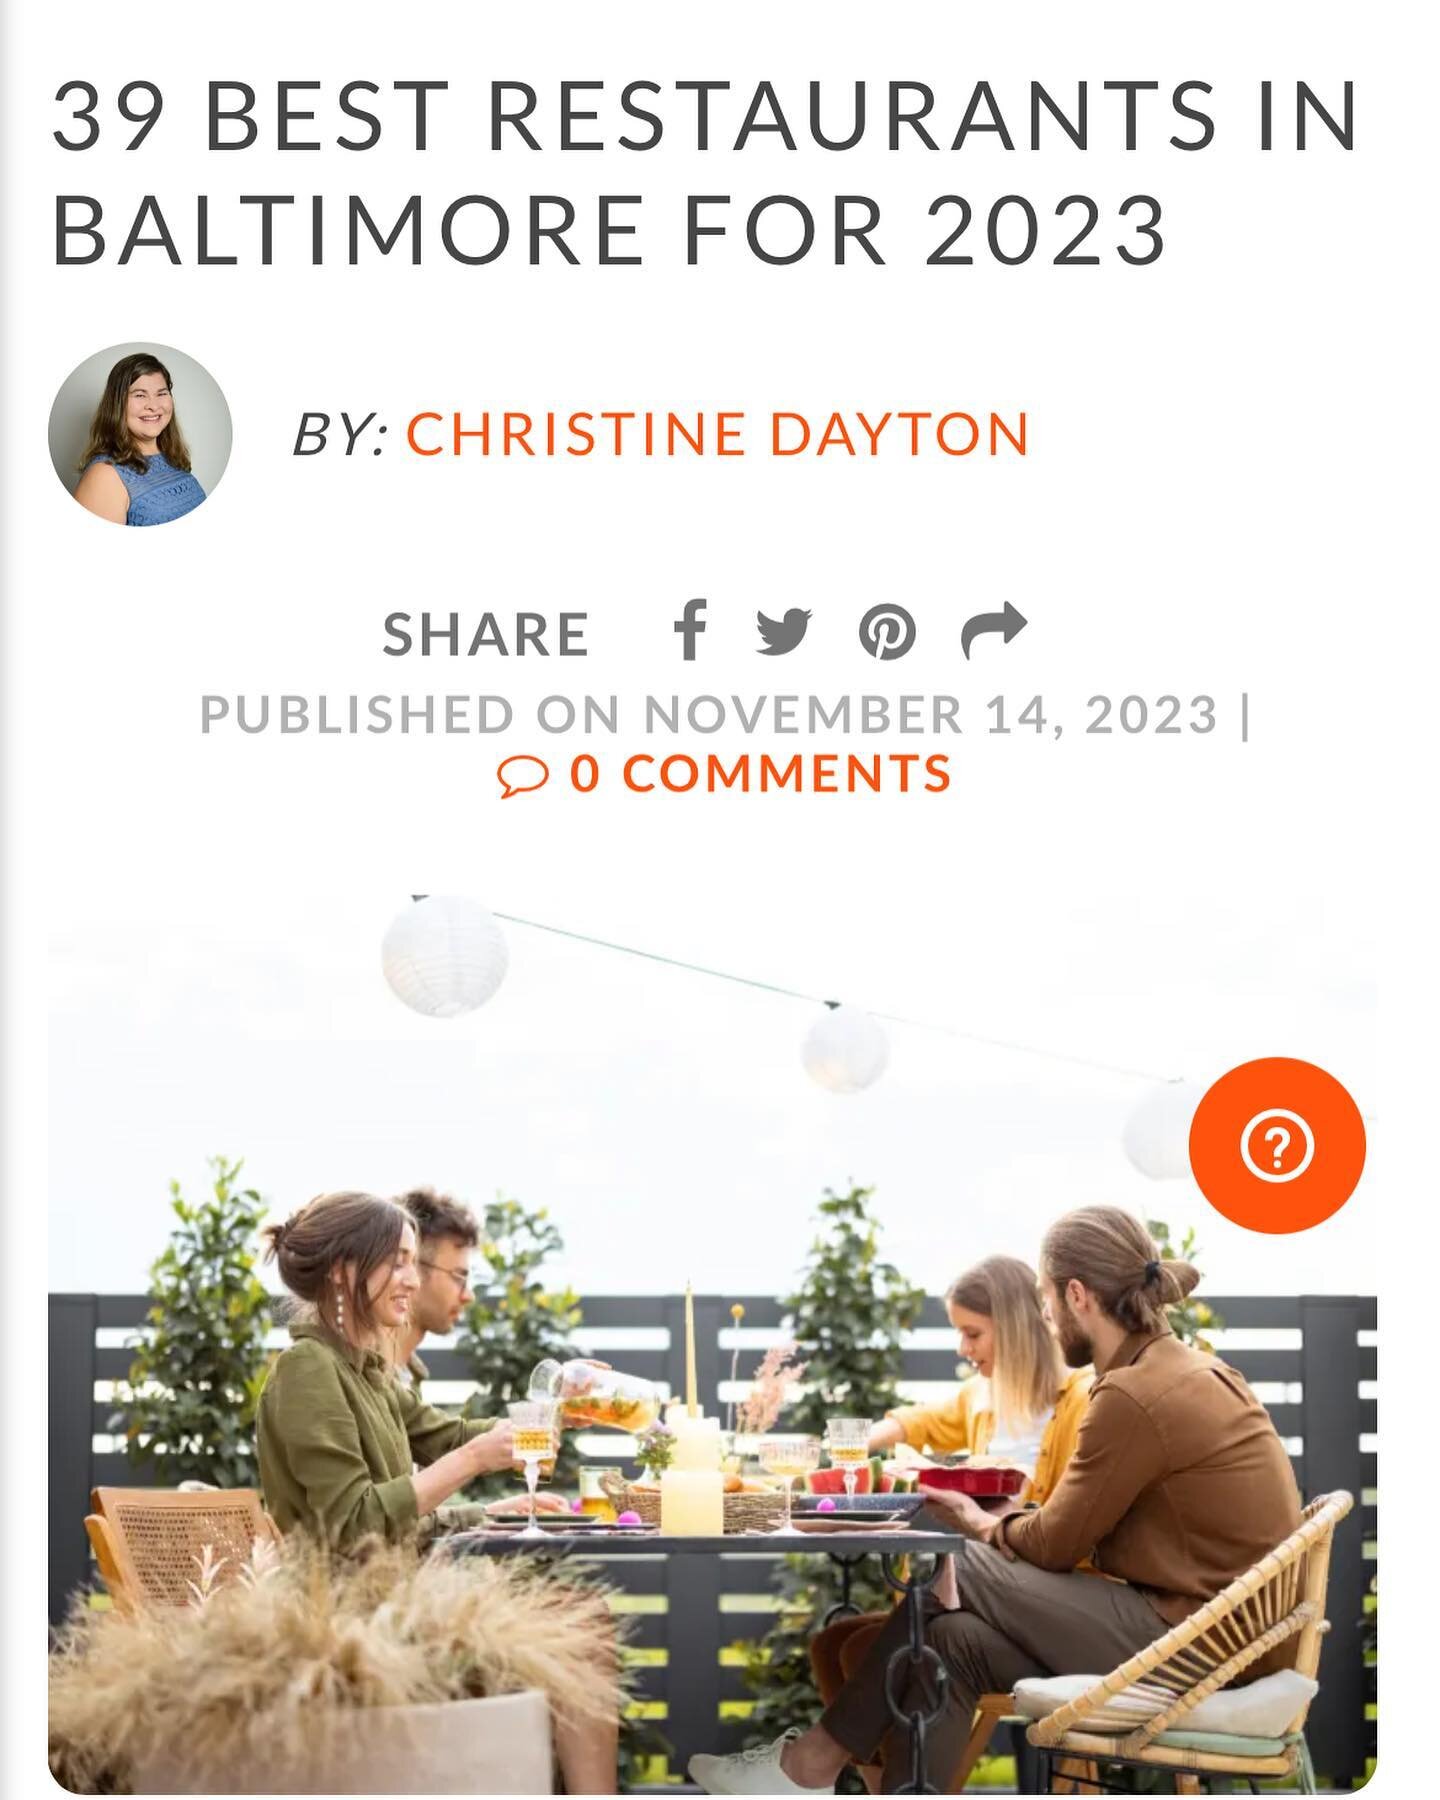 We are so honored to make the list of Best Restaurants in Baltimore after only a few months! Thank you Christine at @cozymeal for the positive review. 🙏🏻

We hope to provide the same unique experience for everyone in the Fells Point area; locals an